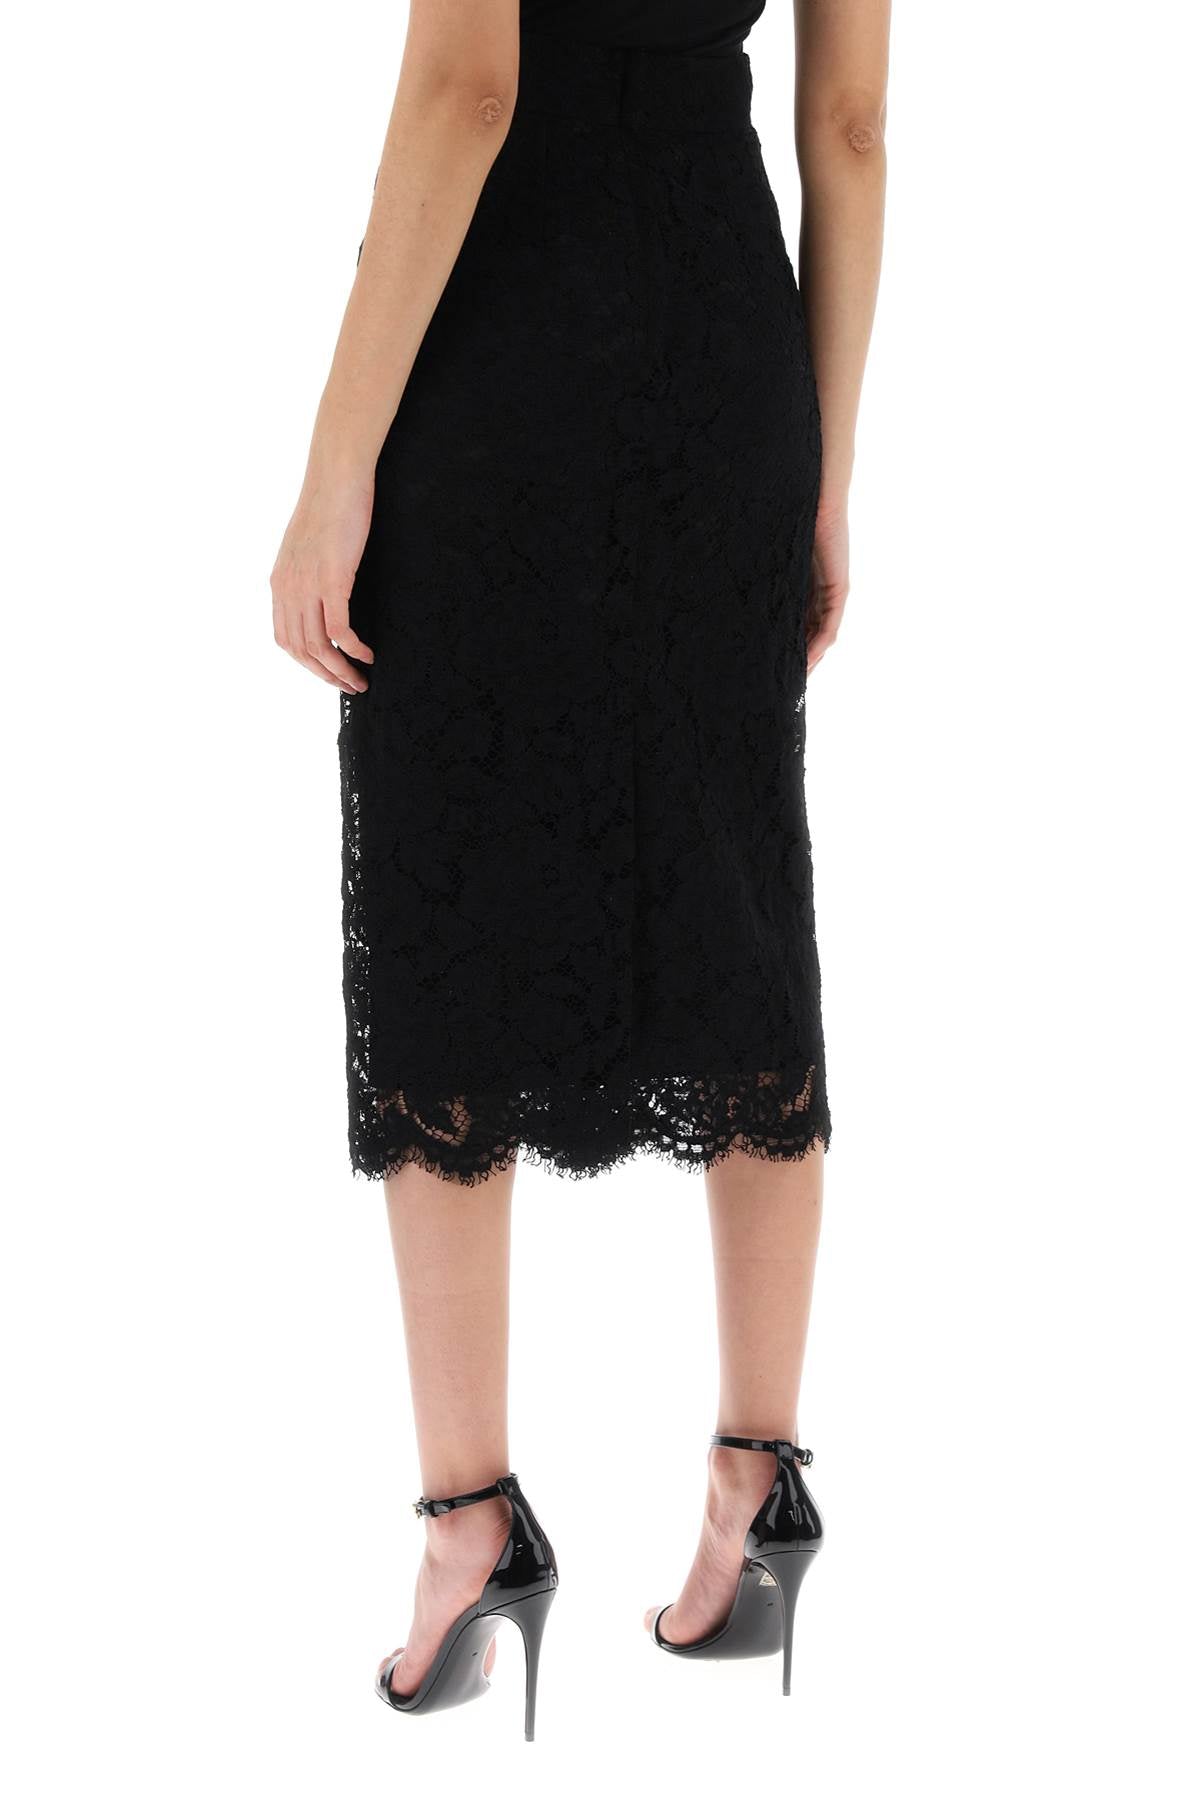 Dolce & gabbana lace pencil skirt with tube silhouette-2